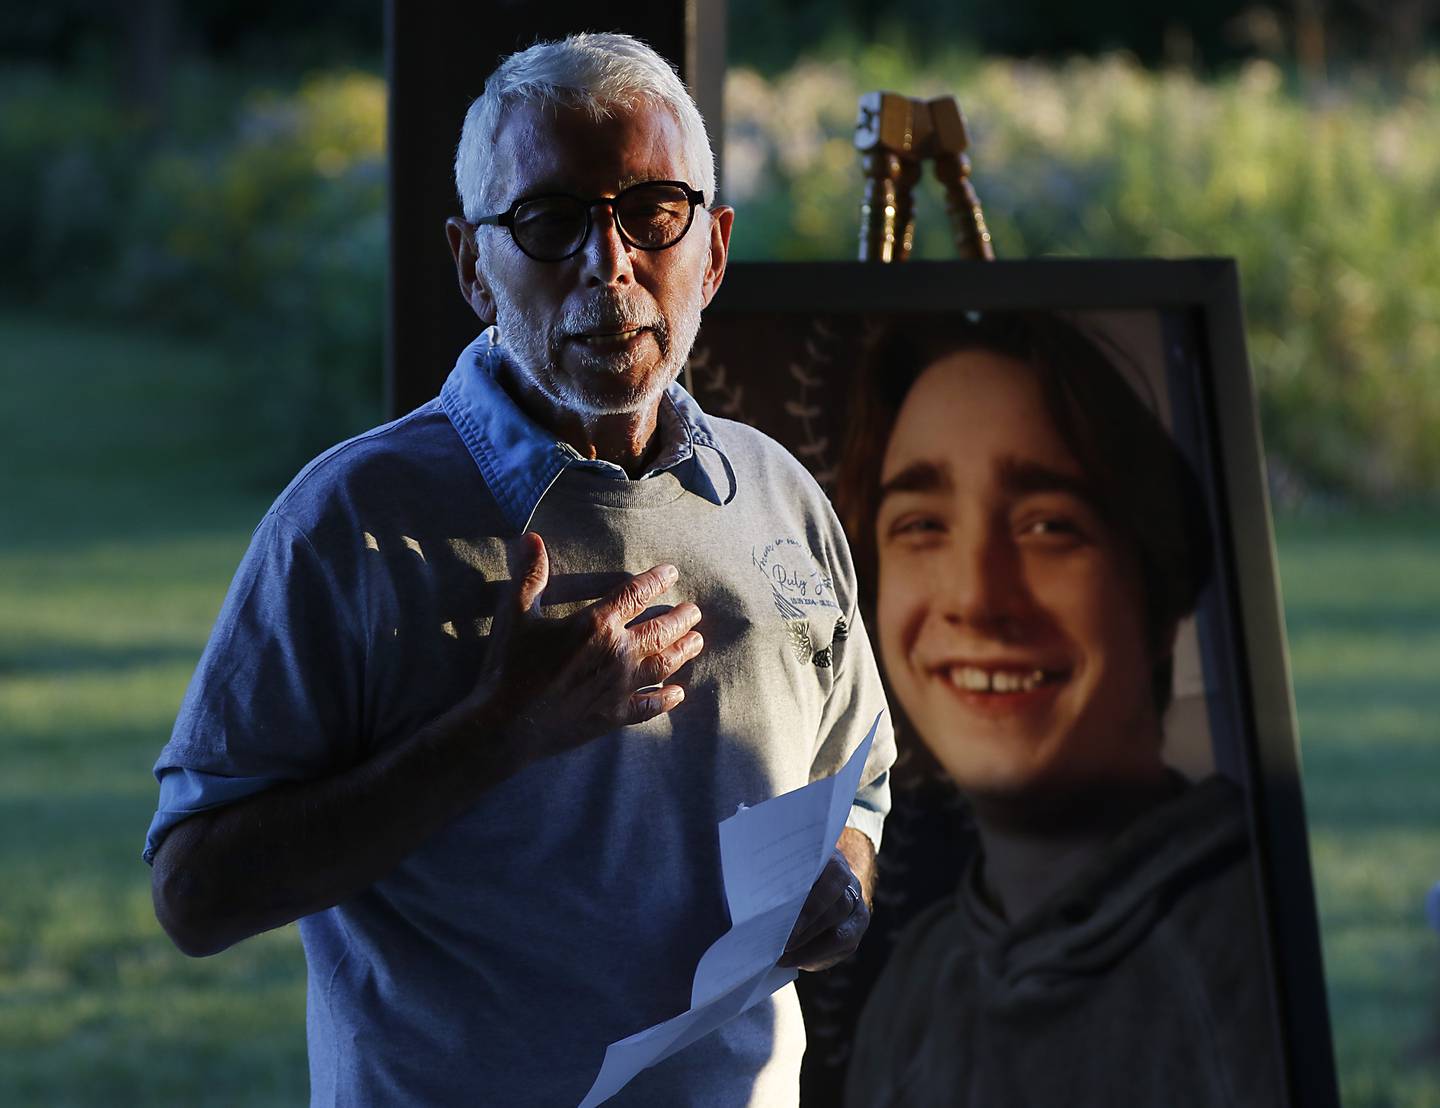 Peter Passuntino talks about his grandson, Riely Teuerle, pictured behind him, during a candlelight celebration for Teuerle on Thursday, August 11, 2022, at Towne Park, 100 Jefferson St. in Algonquin. Teuerle was killed in a car crash in Lake in the Hills the week before. Over 100 family members and friends gathered at the park to remember and celebrate Teuerle’s life.